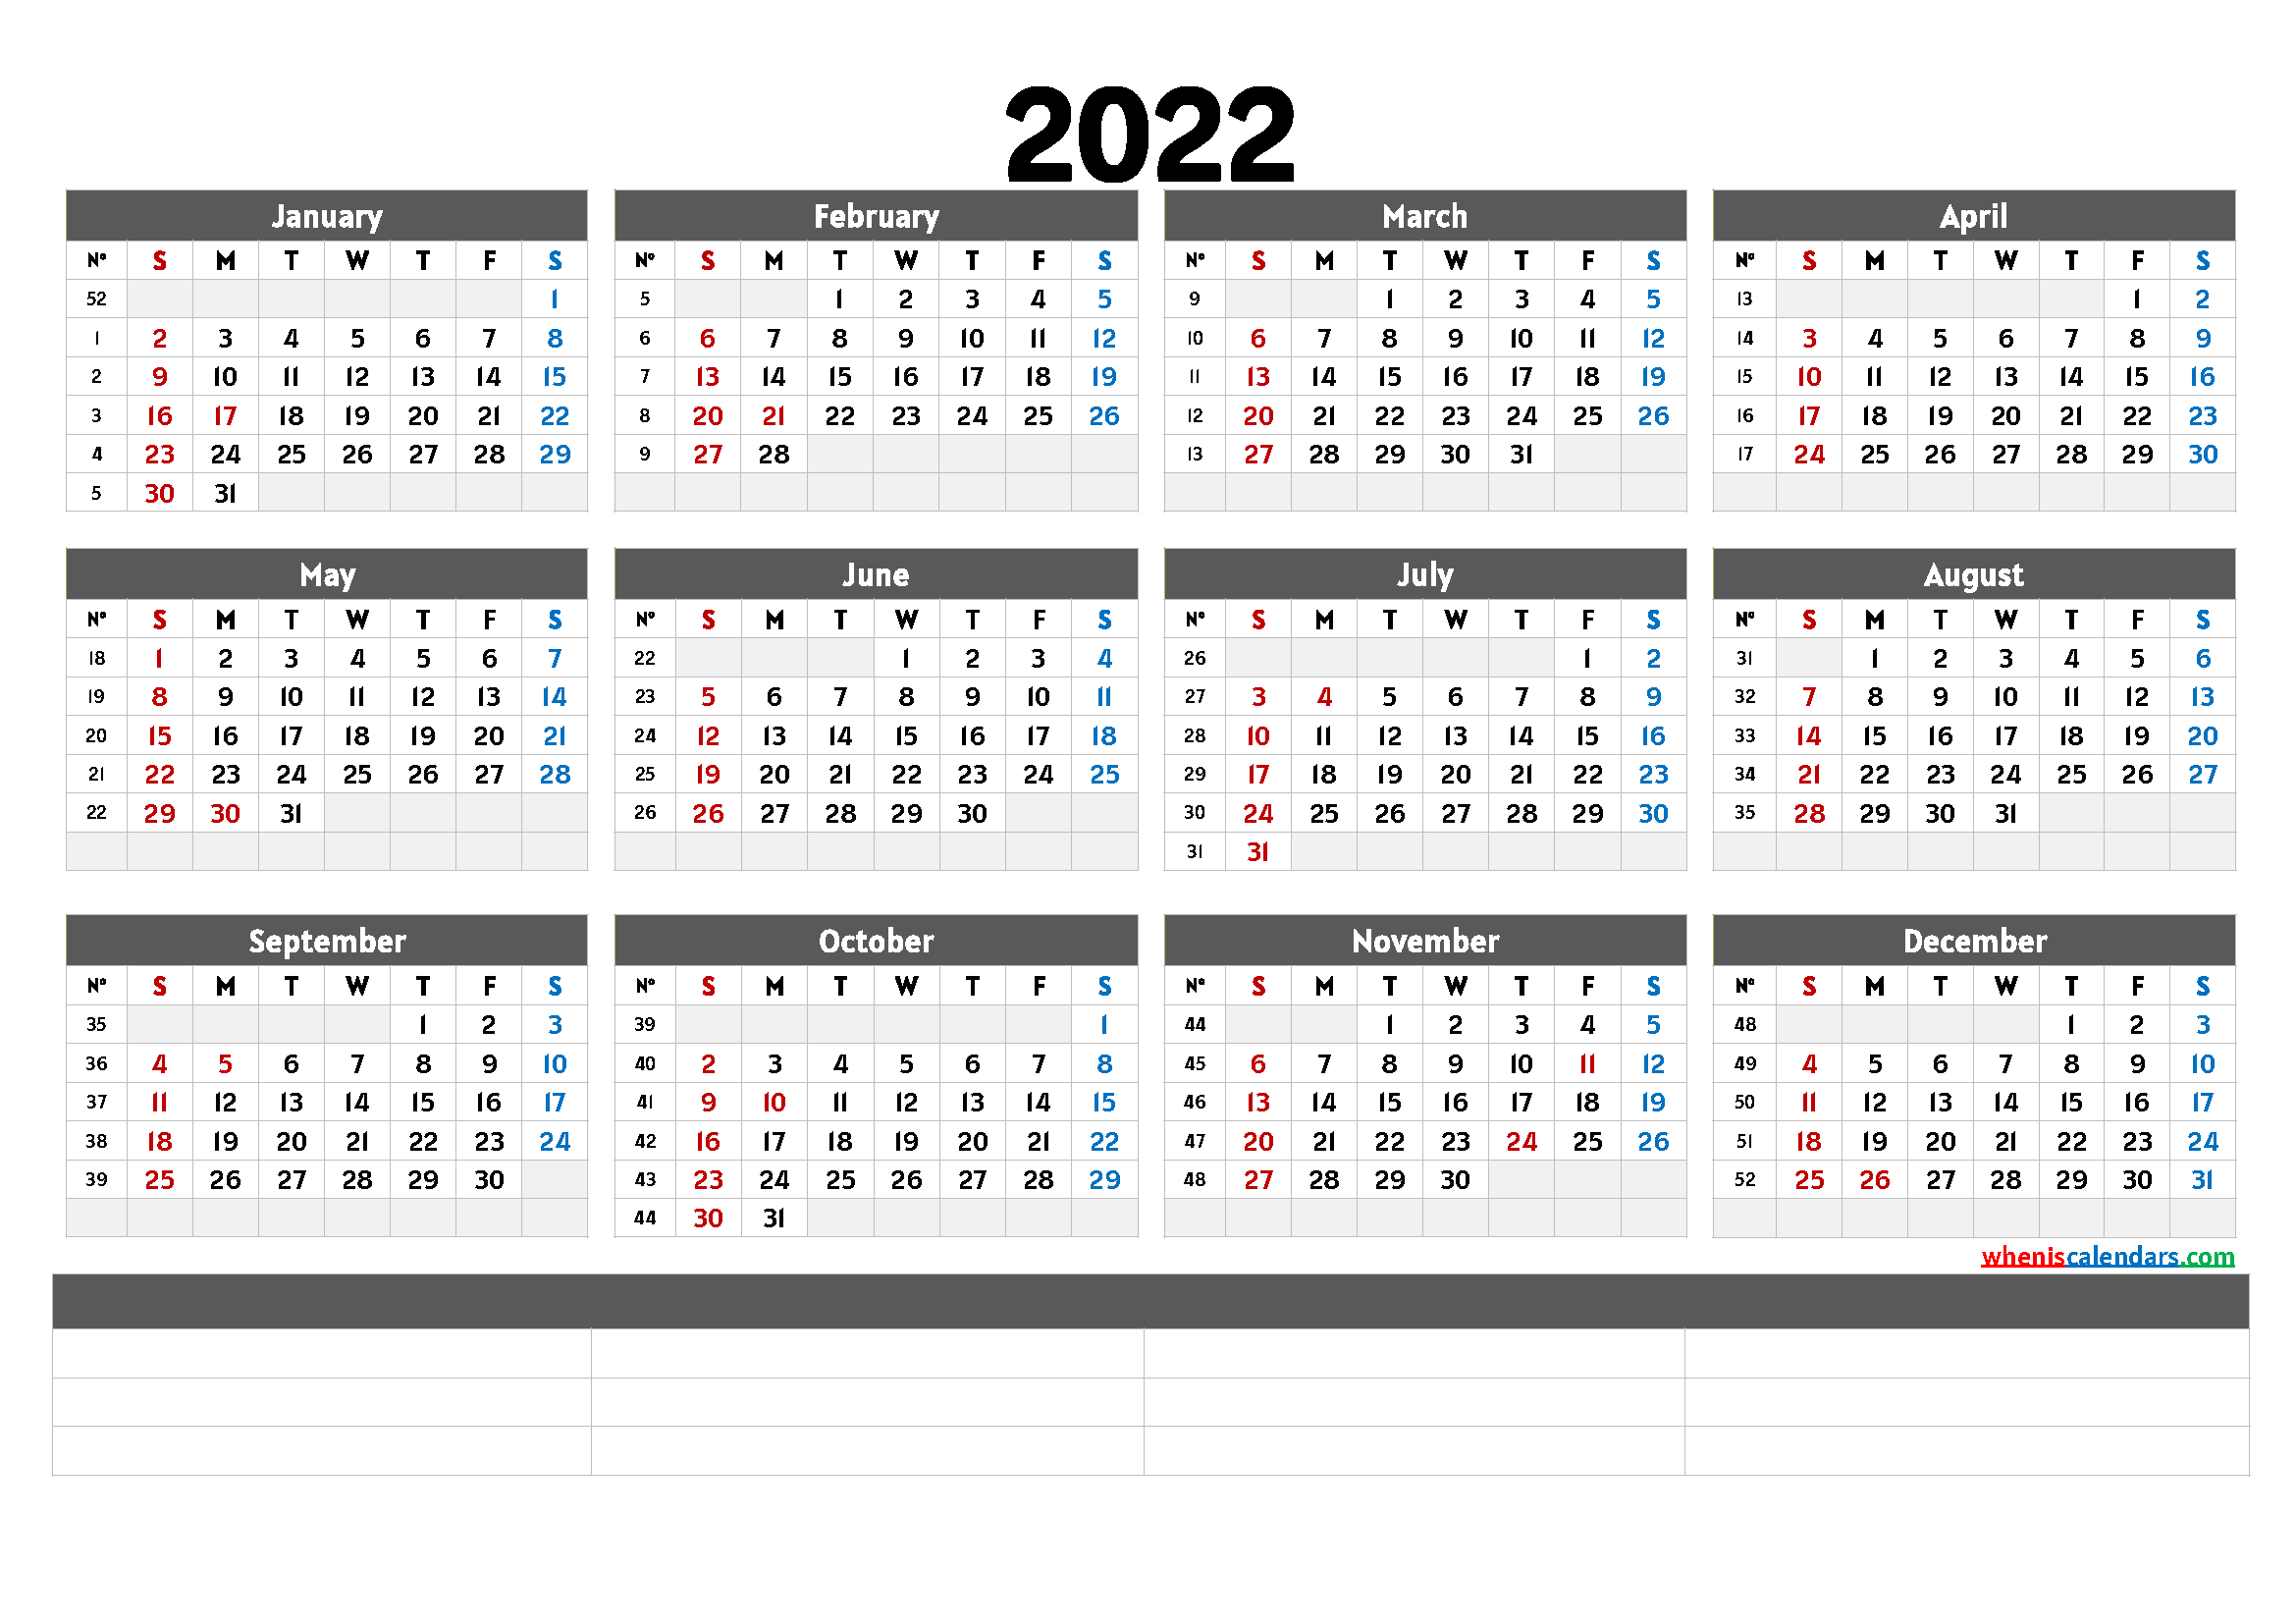 printable-2022-yearly-calendar-6-templates-2022-calendar-with-week-numbers-landscape-pdf-image